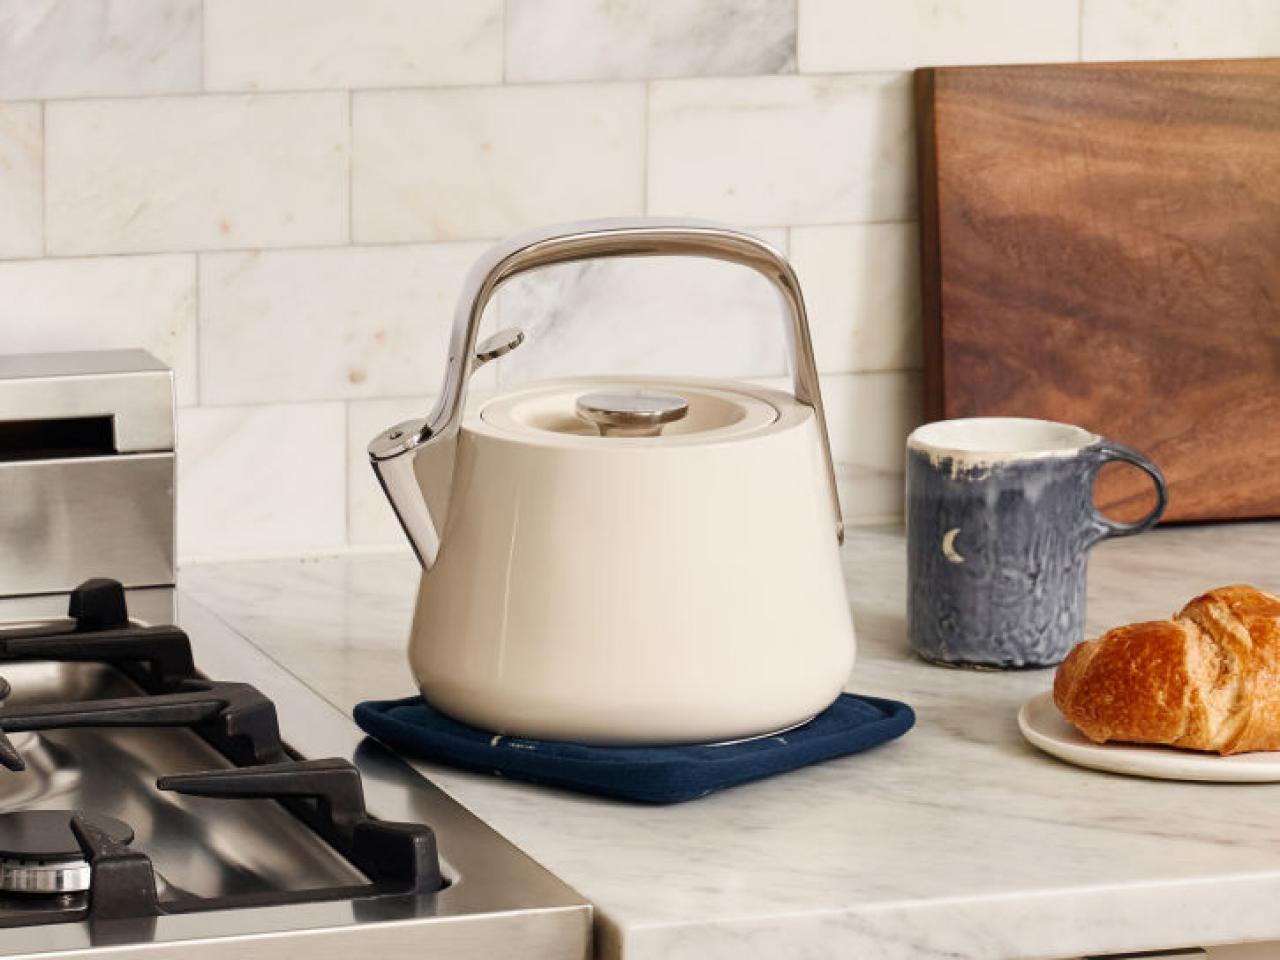 https://food.fnr.sndimg.com/content/dam/images/food/products/2023/4/26/rx_caraway-whistling-tea-kettle.jpeg.rend.hgtvcom.1280.960.suffix/1682522227516.jpeg